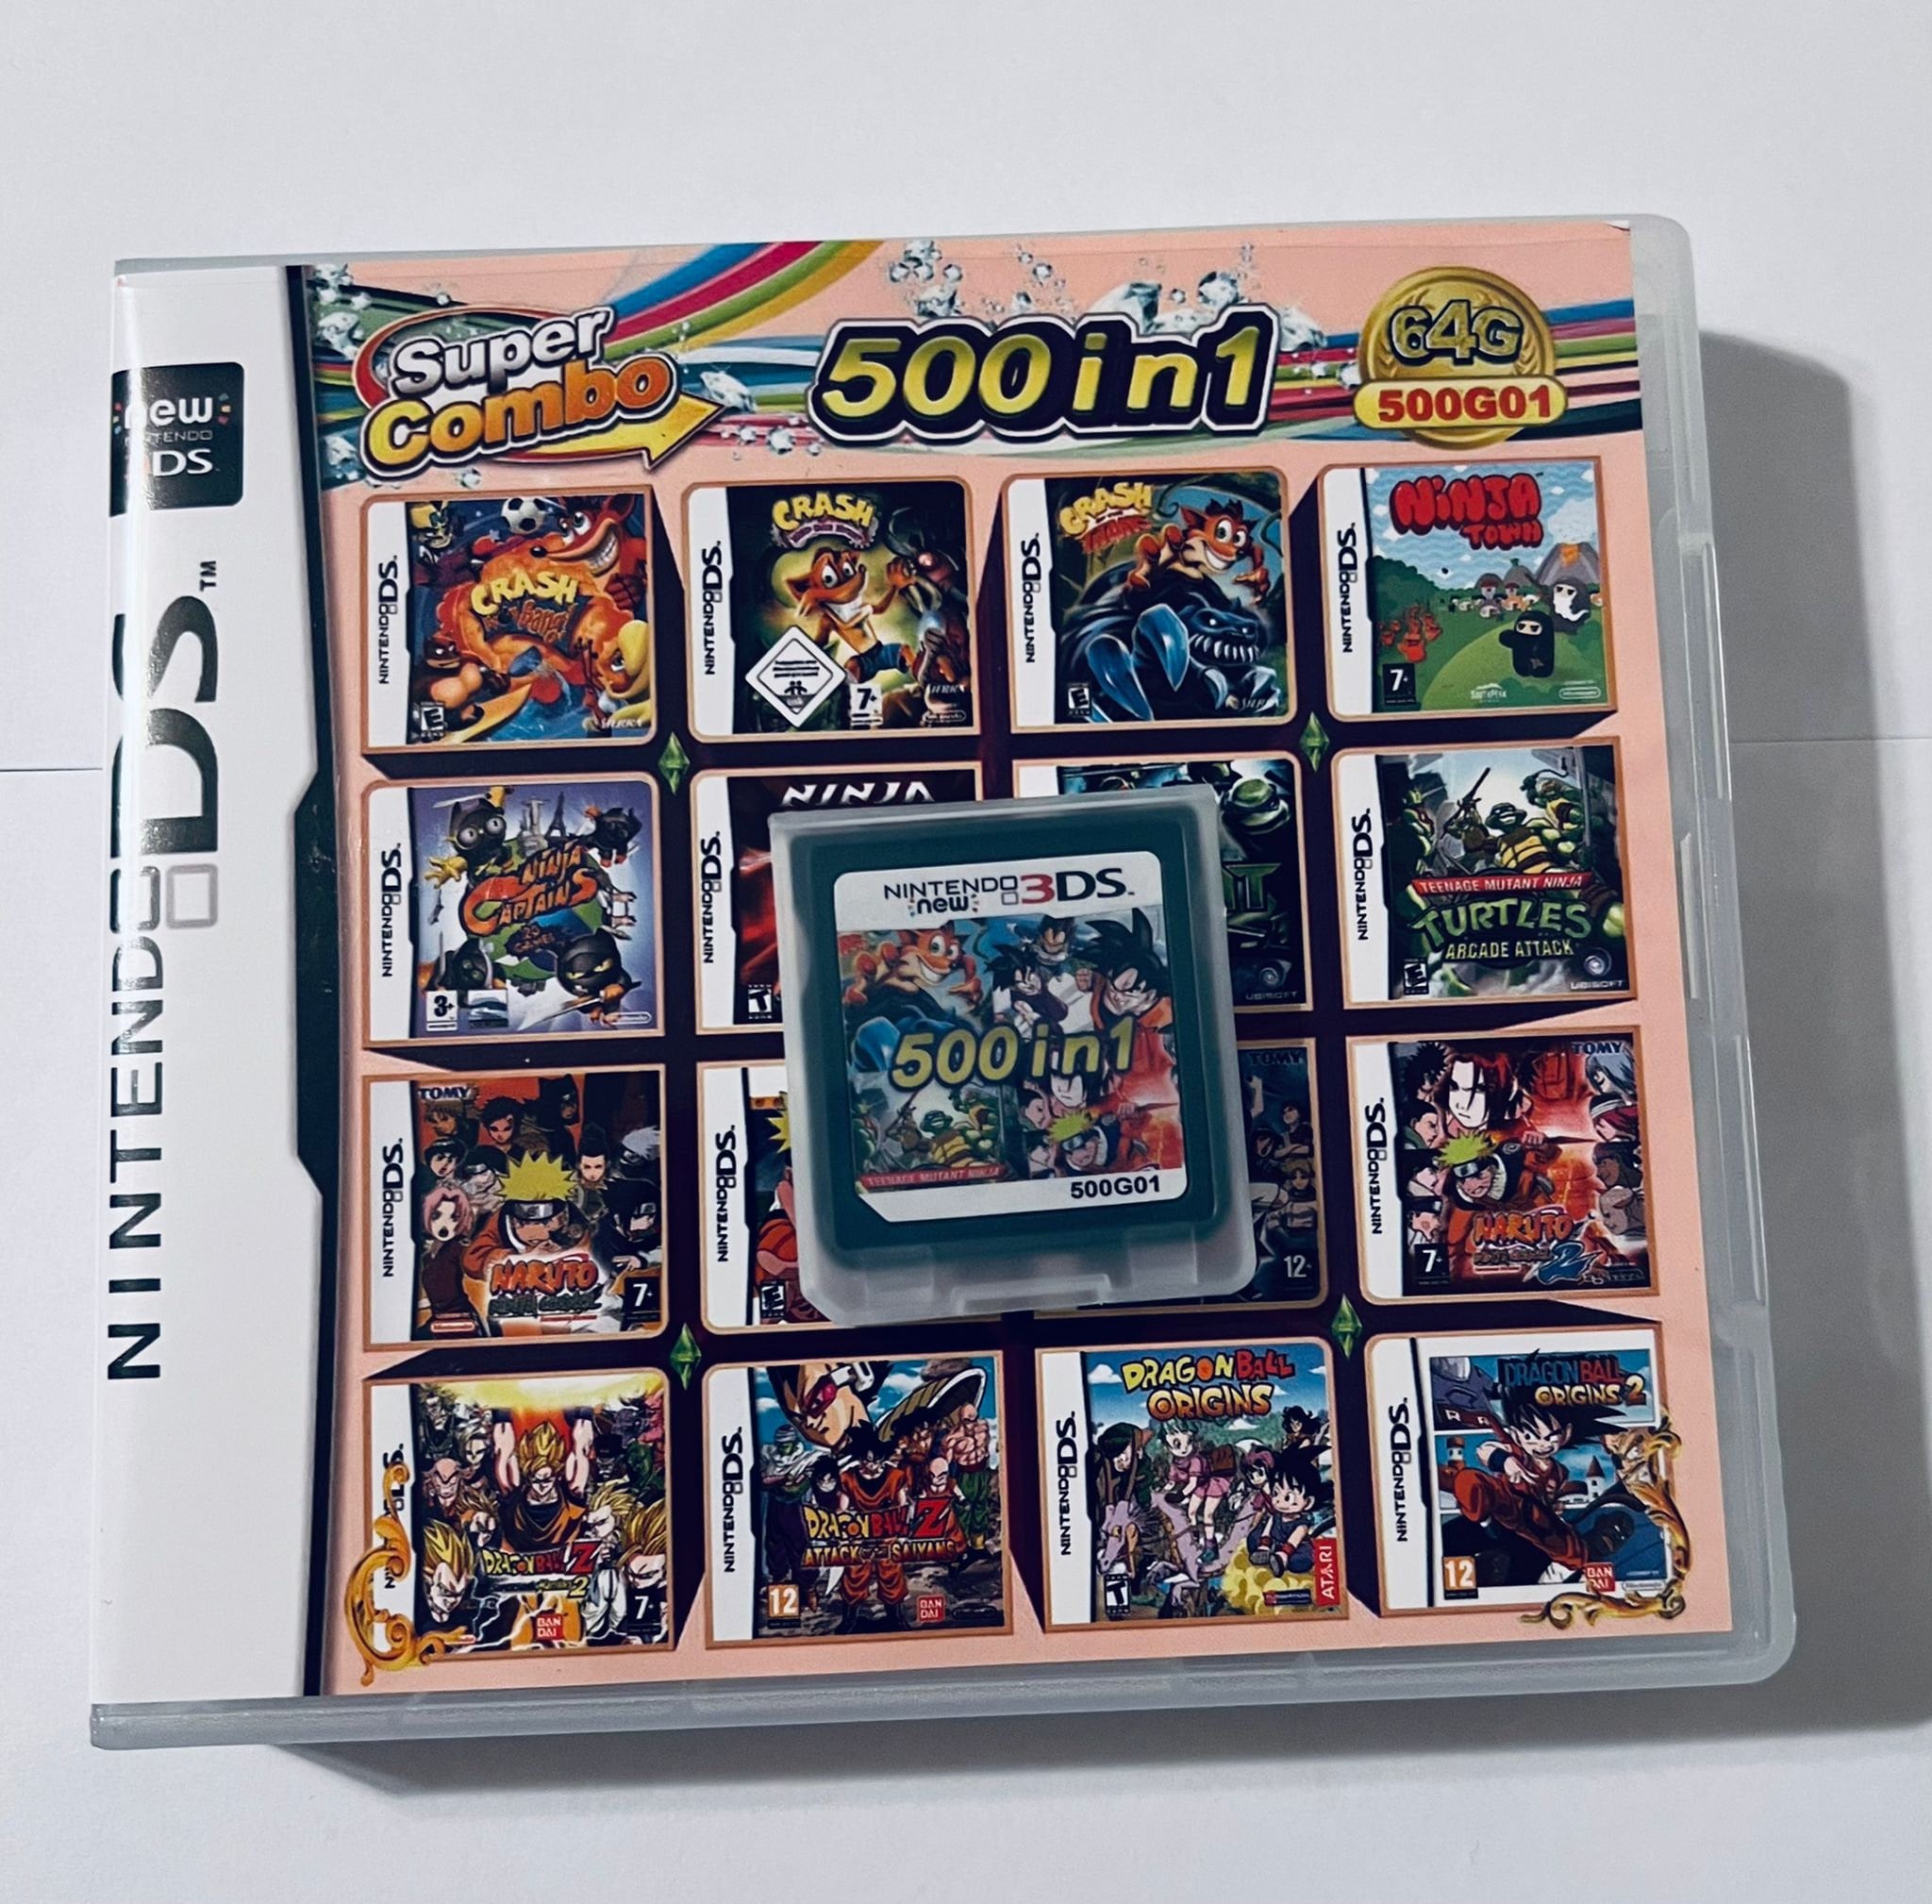 500 in 1 Super Combo All in 1 Game Cart Games Cartridge for